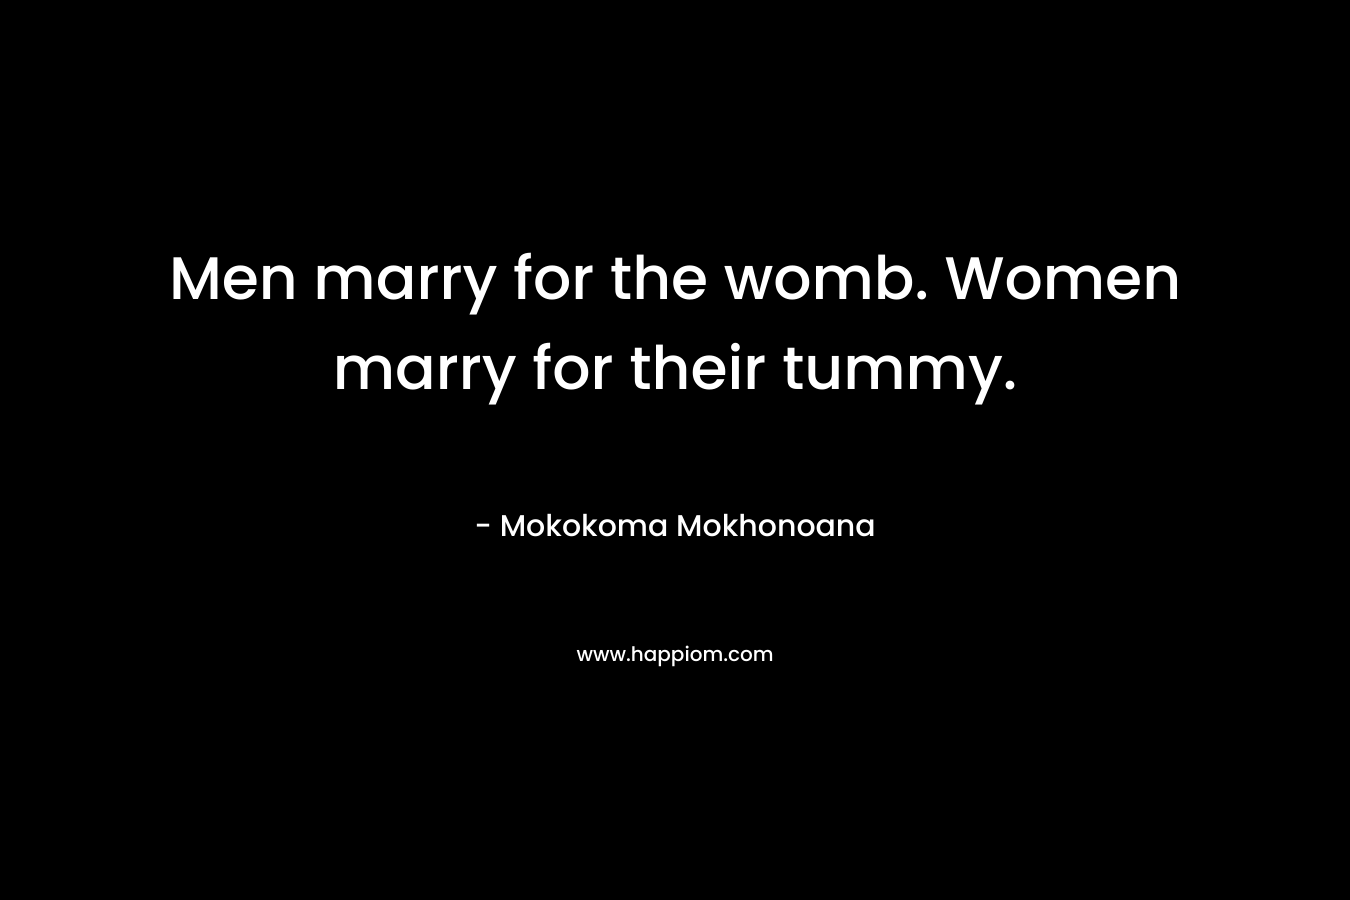 Men marry for the womb. Women marry for their tummy.